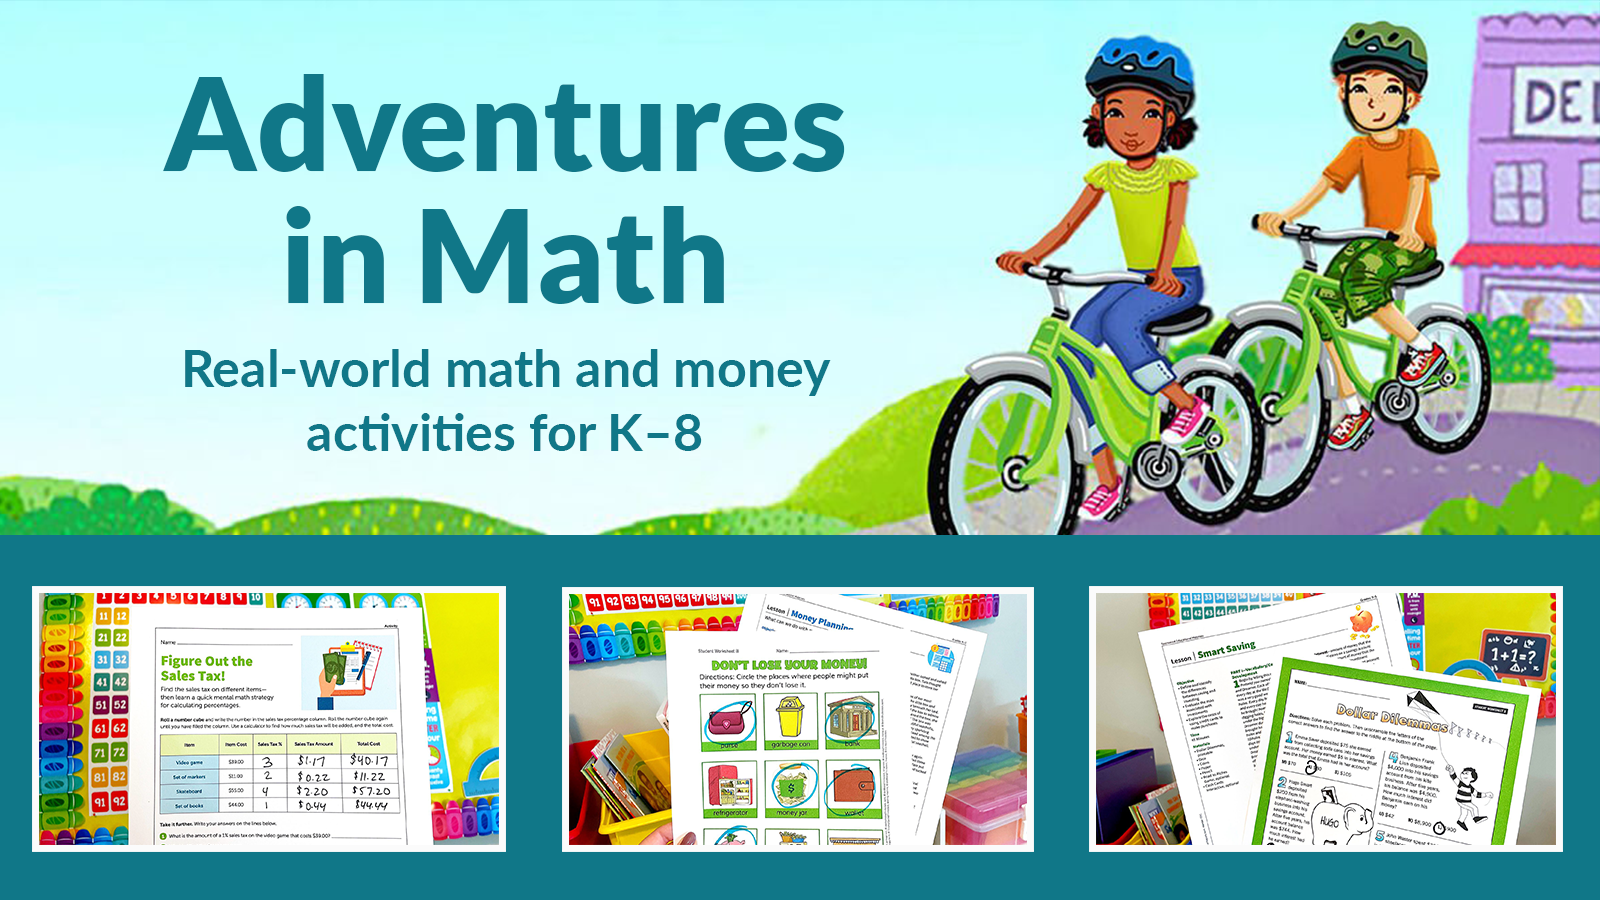 Image showing 3 classroom activities featured on the site